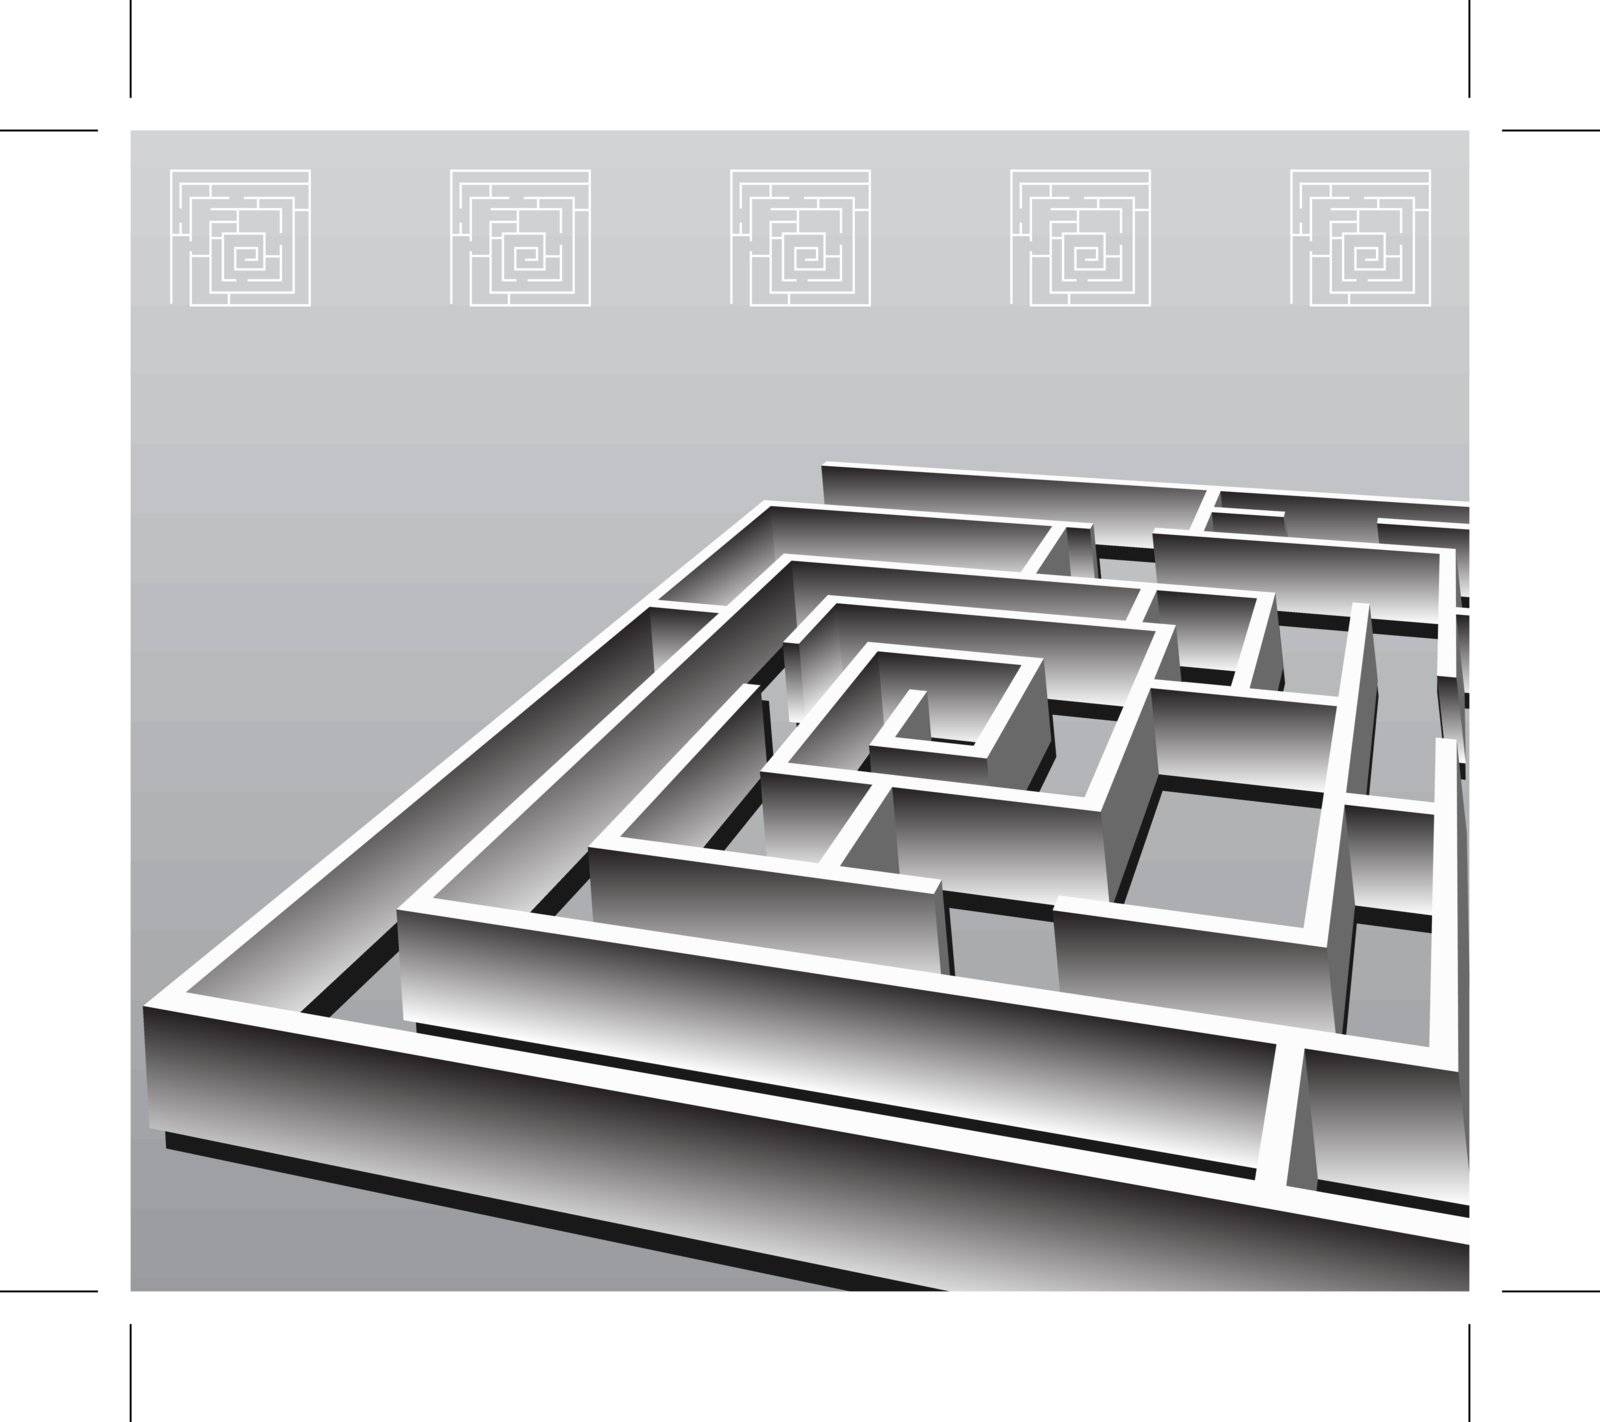 An image of a Square Maze.